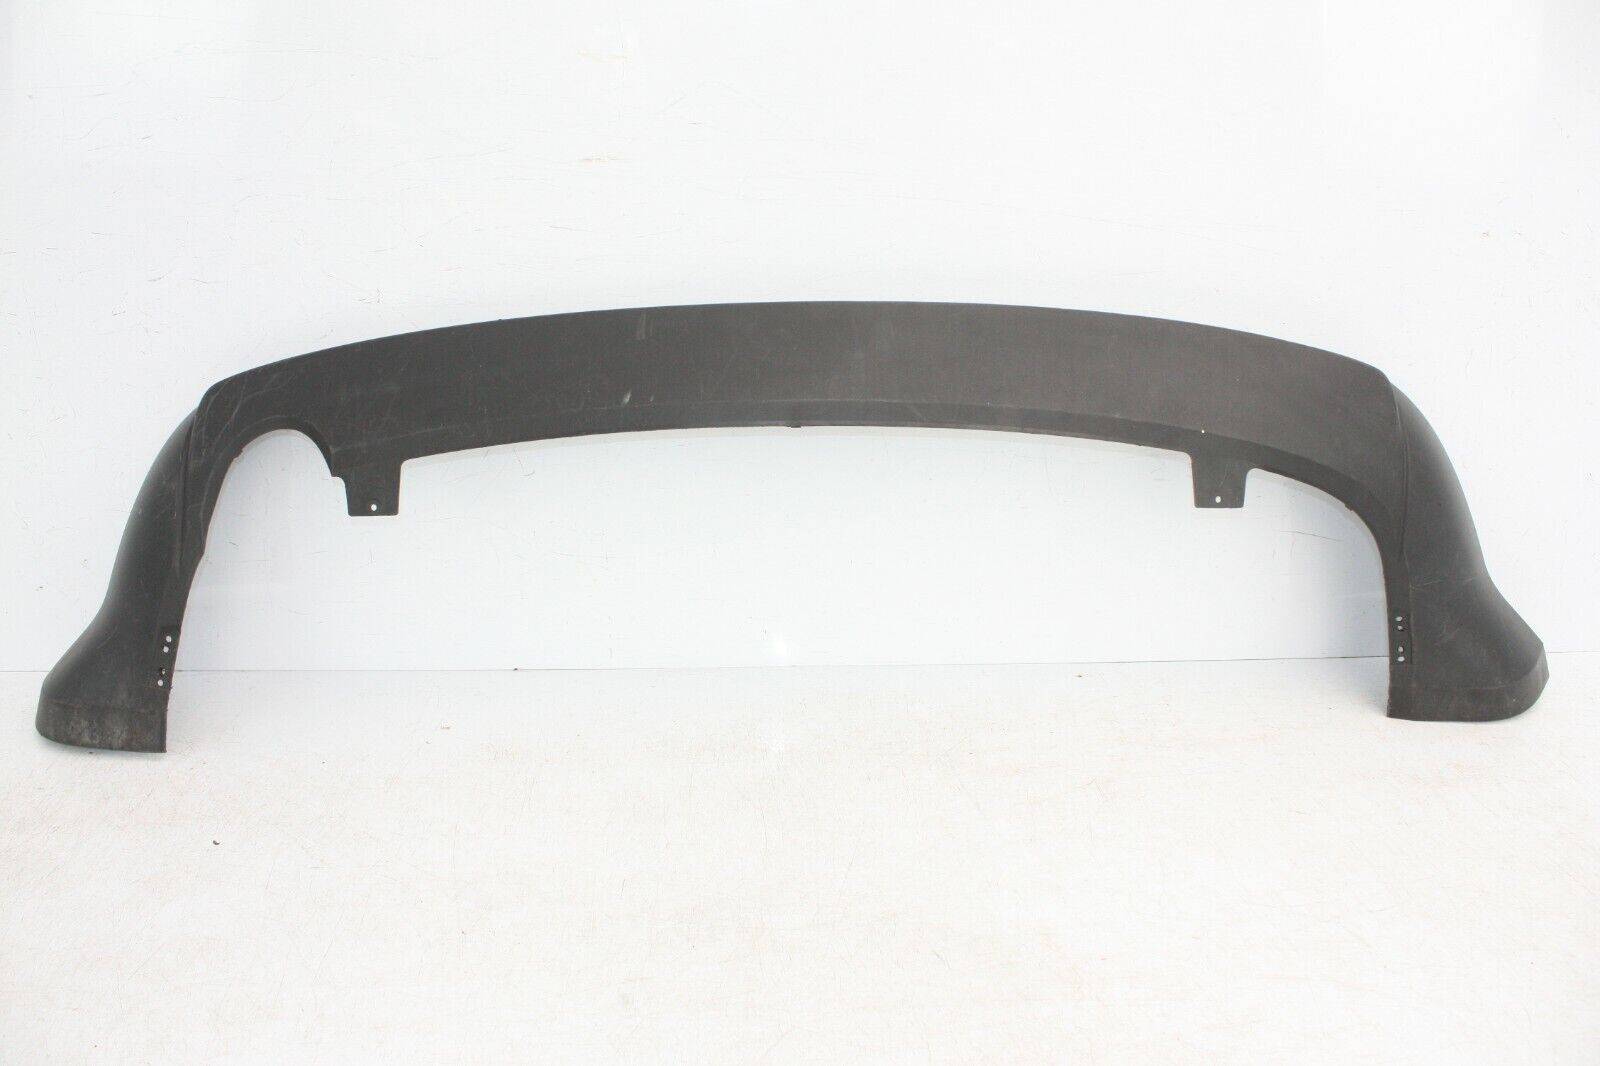 Ford-C-Max-Rear-Bumper-Lower-Section-2004-To-2007-3M51-R17A894-AB-175902867116-5